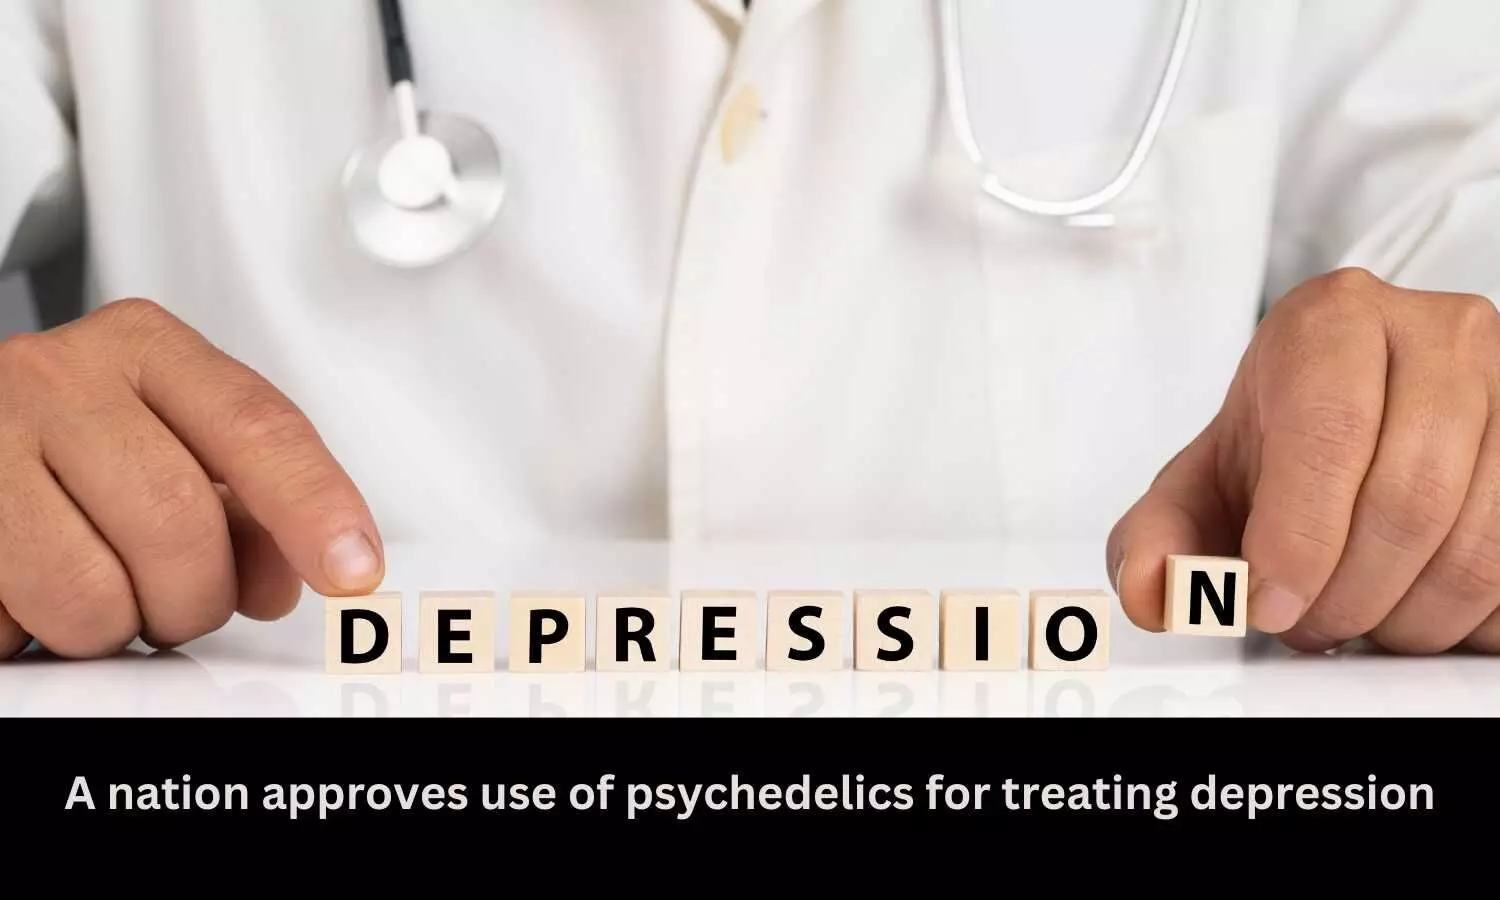 A nation approves use of psychedelics for treating depression